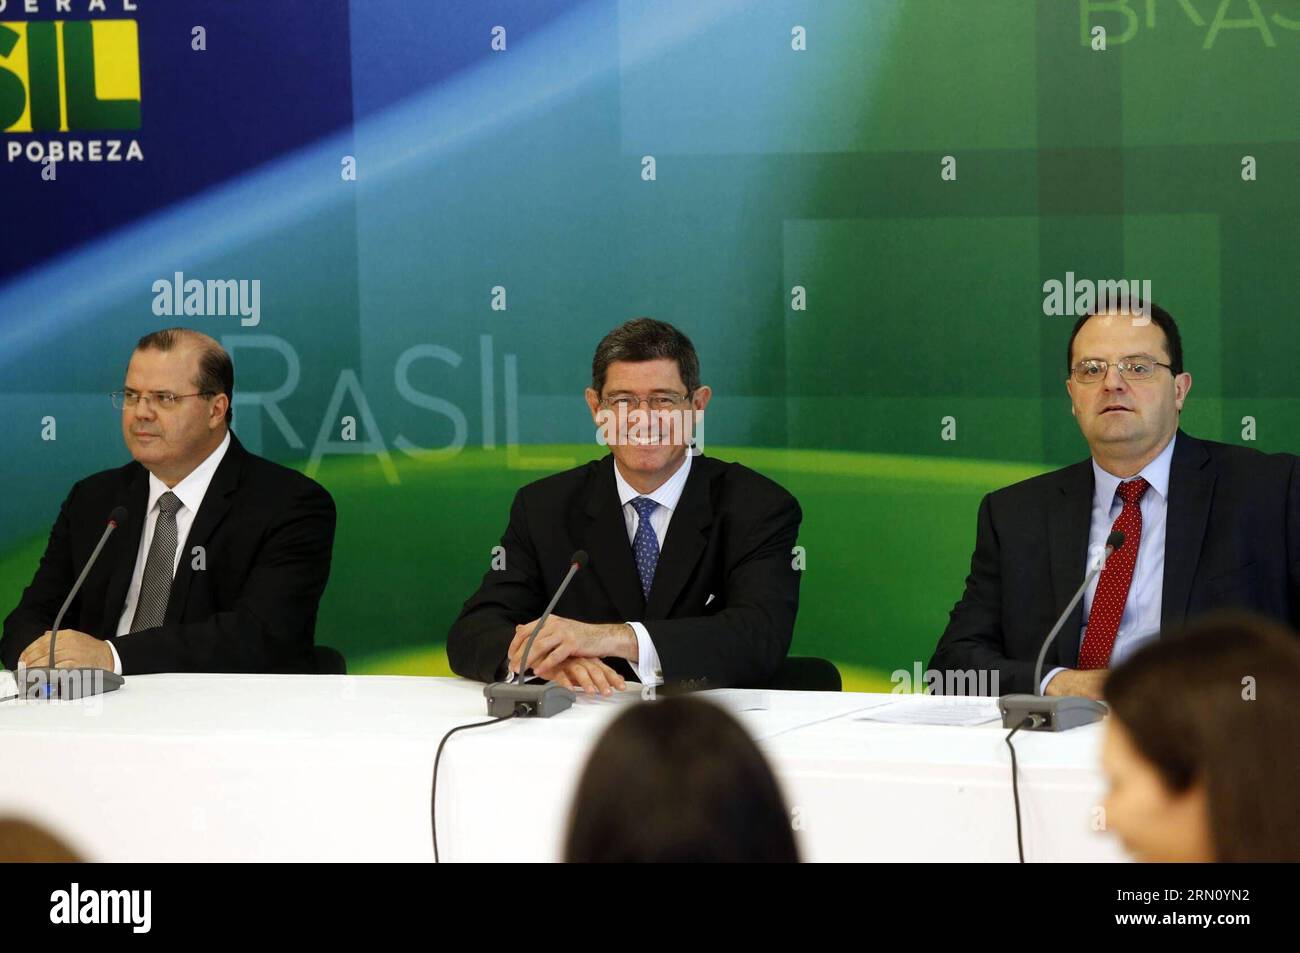 (141127) -- BRASILIA, Nov. 27, 2014 -- Economists Joaquim Levy (C) and Nelson Barbosa(L) participate in a press conference at the Palace of the Plateau, in Brasilia, capital of Brazil, on Nov. 27, 2014. President of Brazil Dilma Rousseff designated Joaquim Levy as new finance minister and Nelson Barbosa as the planning minister. Andre Dusek/) (ah) BRAZIL OUT BRAZIL-BRASILIA-POLITICS-DESIGNATION AGENCIAxESTADO PUBLICATIONxNOTxINxCHN   Brasilia Nov 27 2014 Economists Joaquim Levy C and Nelson Barbosa l participate in a Press Conference AT The Palace of The Plateau in Brasilia Capital of Brazil O Stock Photo